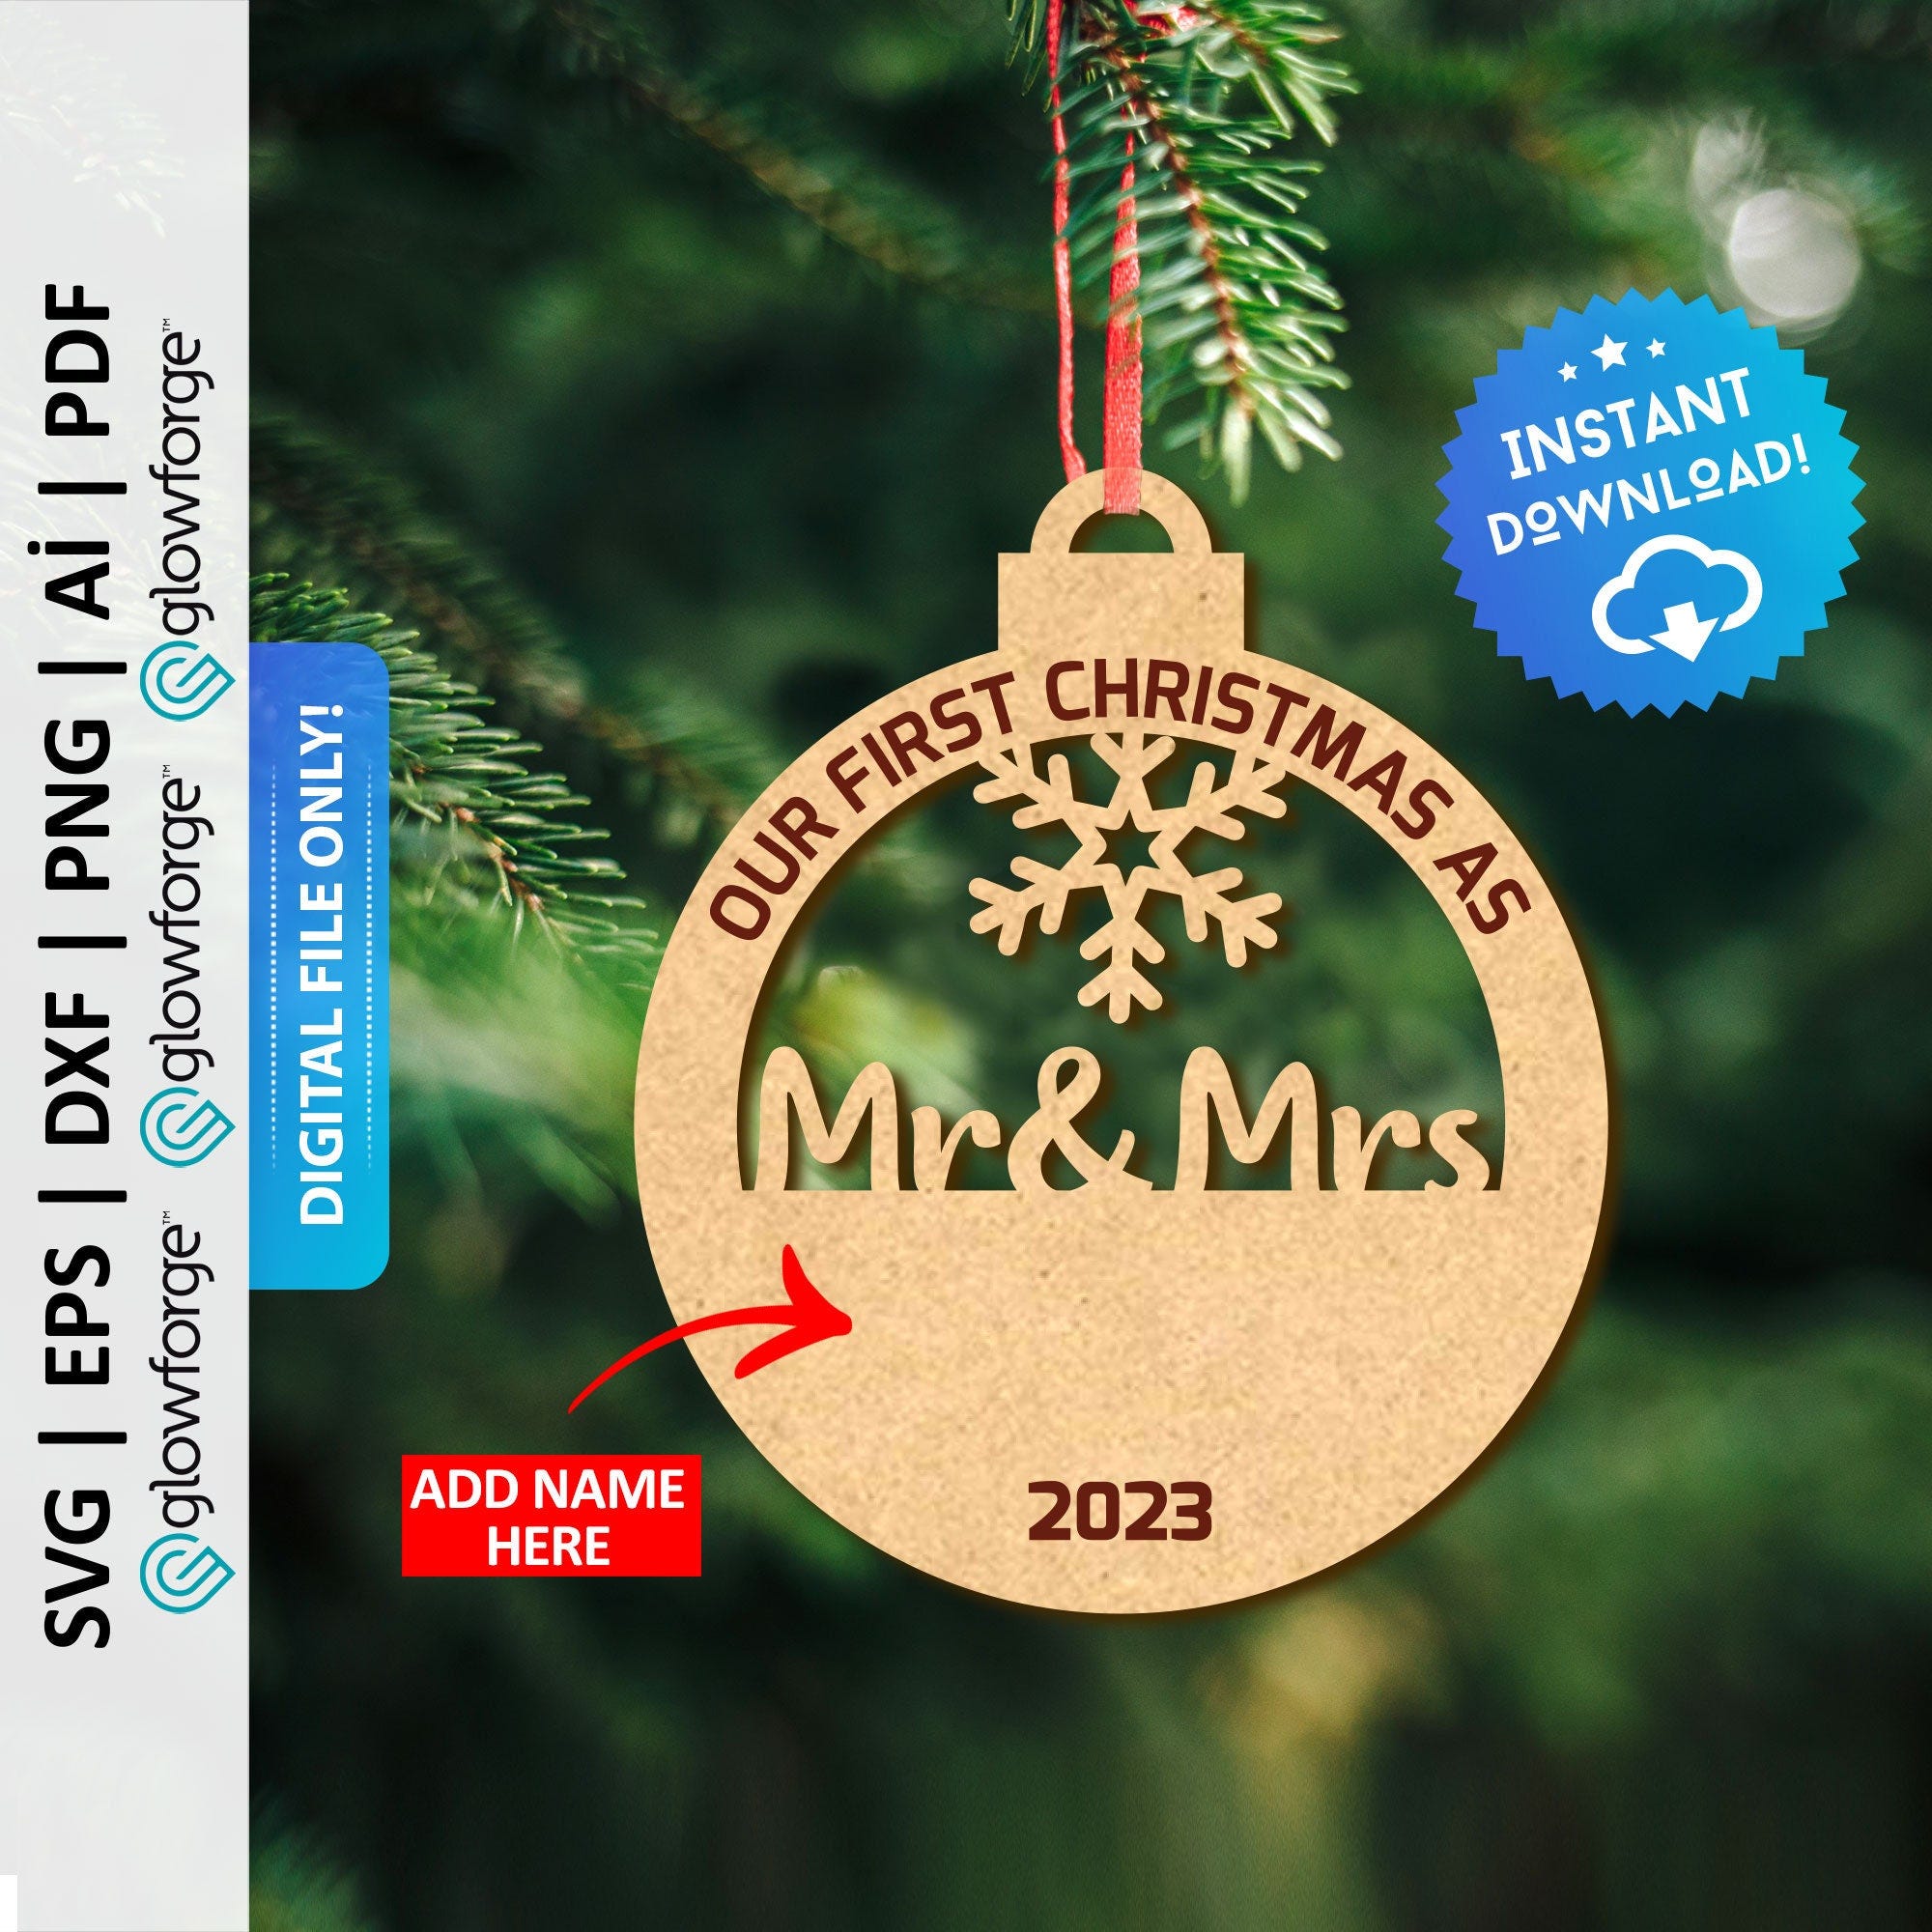 Our First Christmas Ornament Svg, Mr & Mrs Ornament Dxf, Couple Xmas Ornaments Dxf, Glowforge Svg, Laser Cut File, Instant Download - PD0325